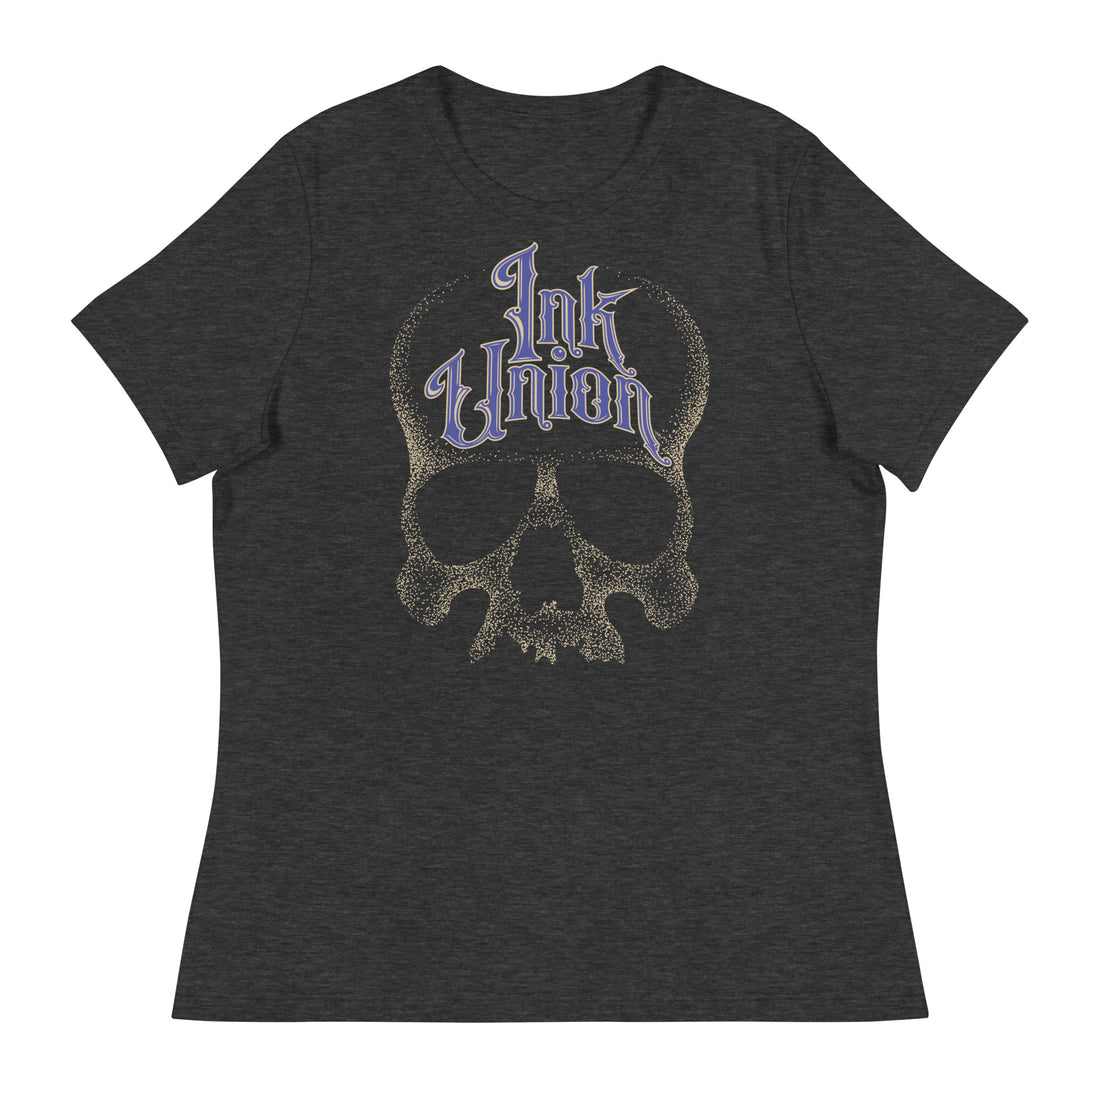 A dark grey t-shirt  featuring a large dot work gold skull centered on the shirt and Ink Union in large fancy gold and blue script across the forehead of the skull